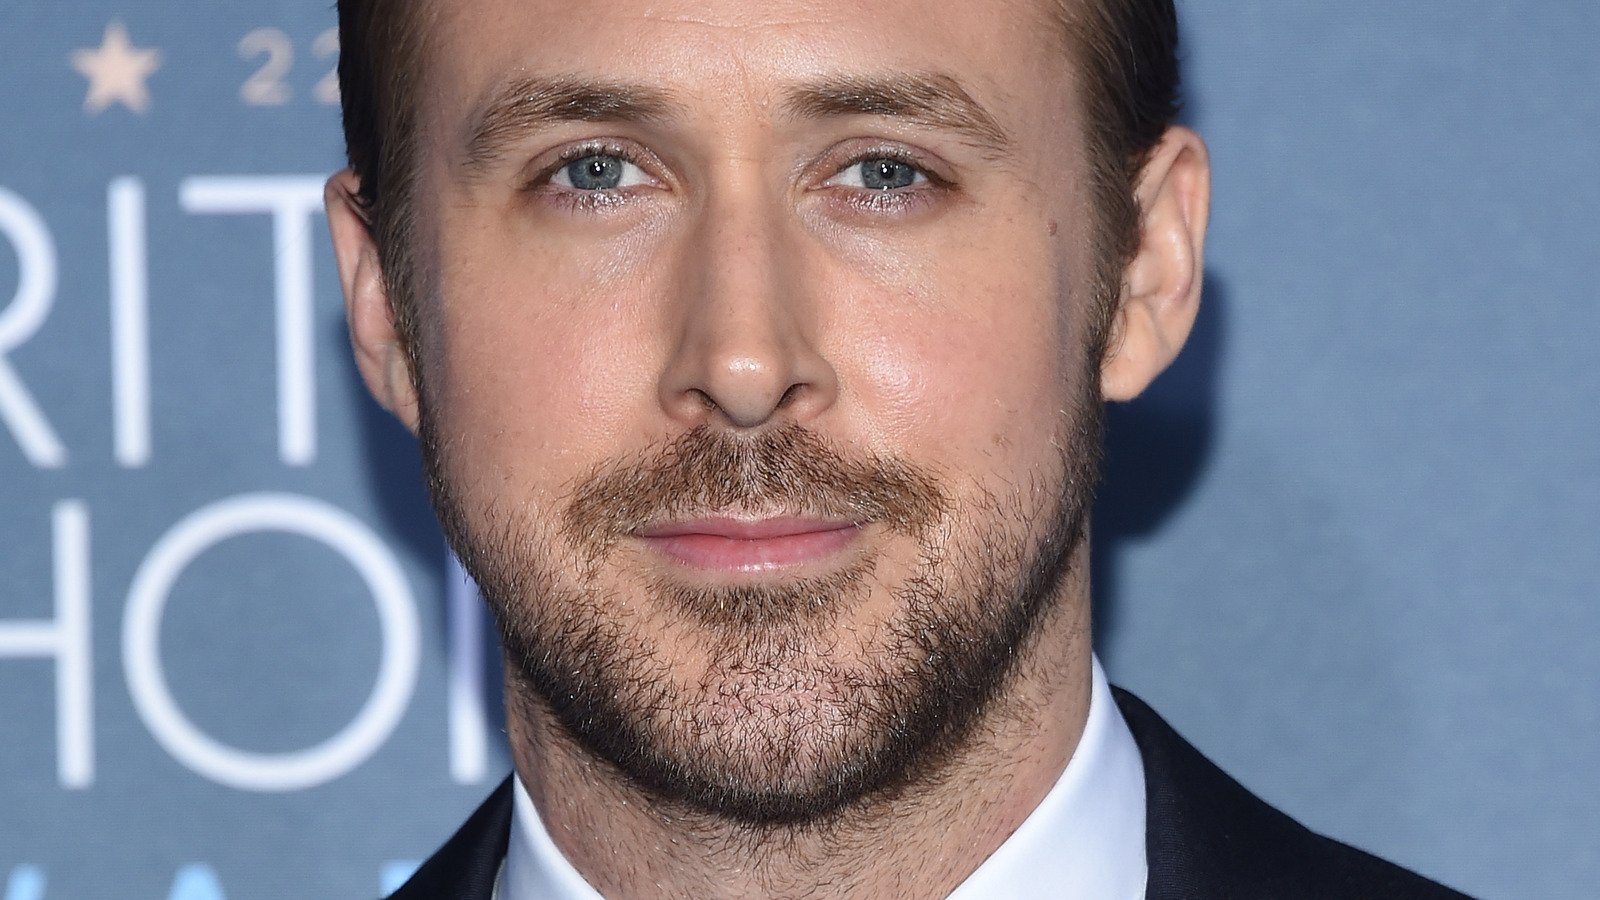 Ryan Gosling And Eva Mendes Have A Bigger Age Gap Than You Thought